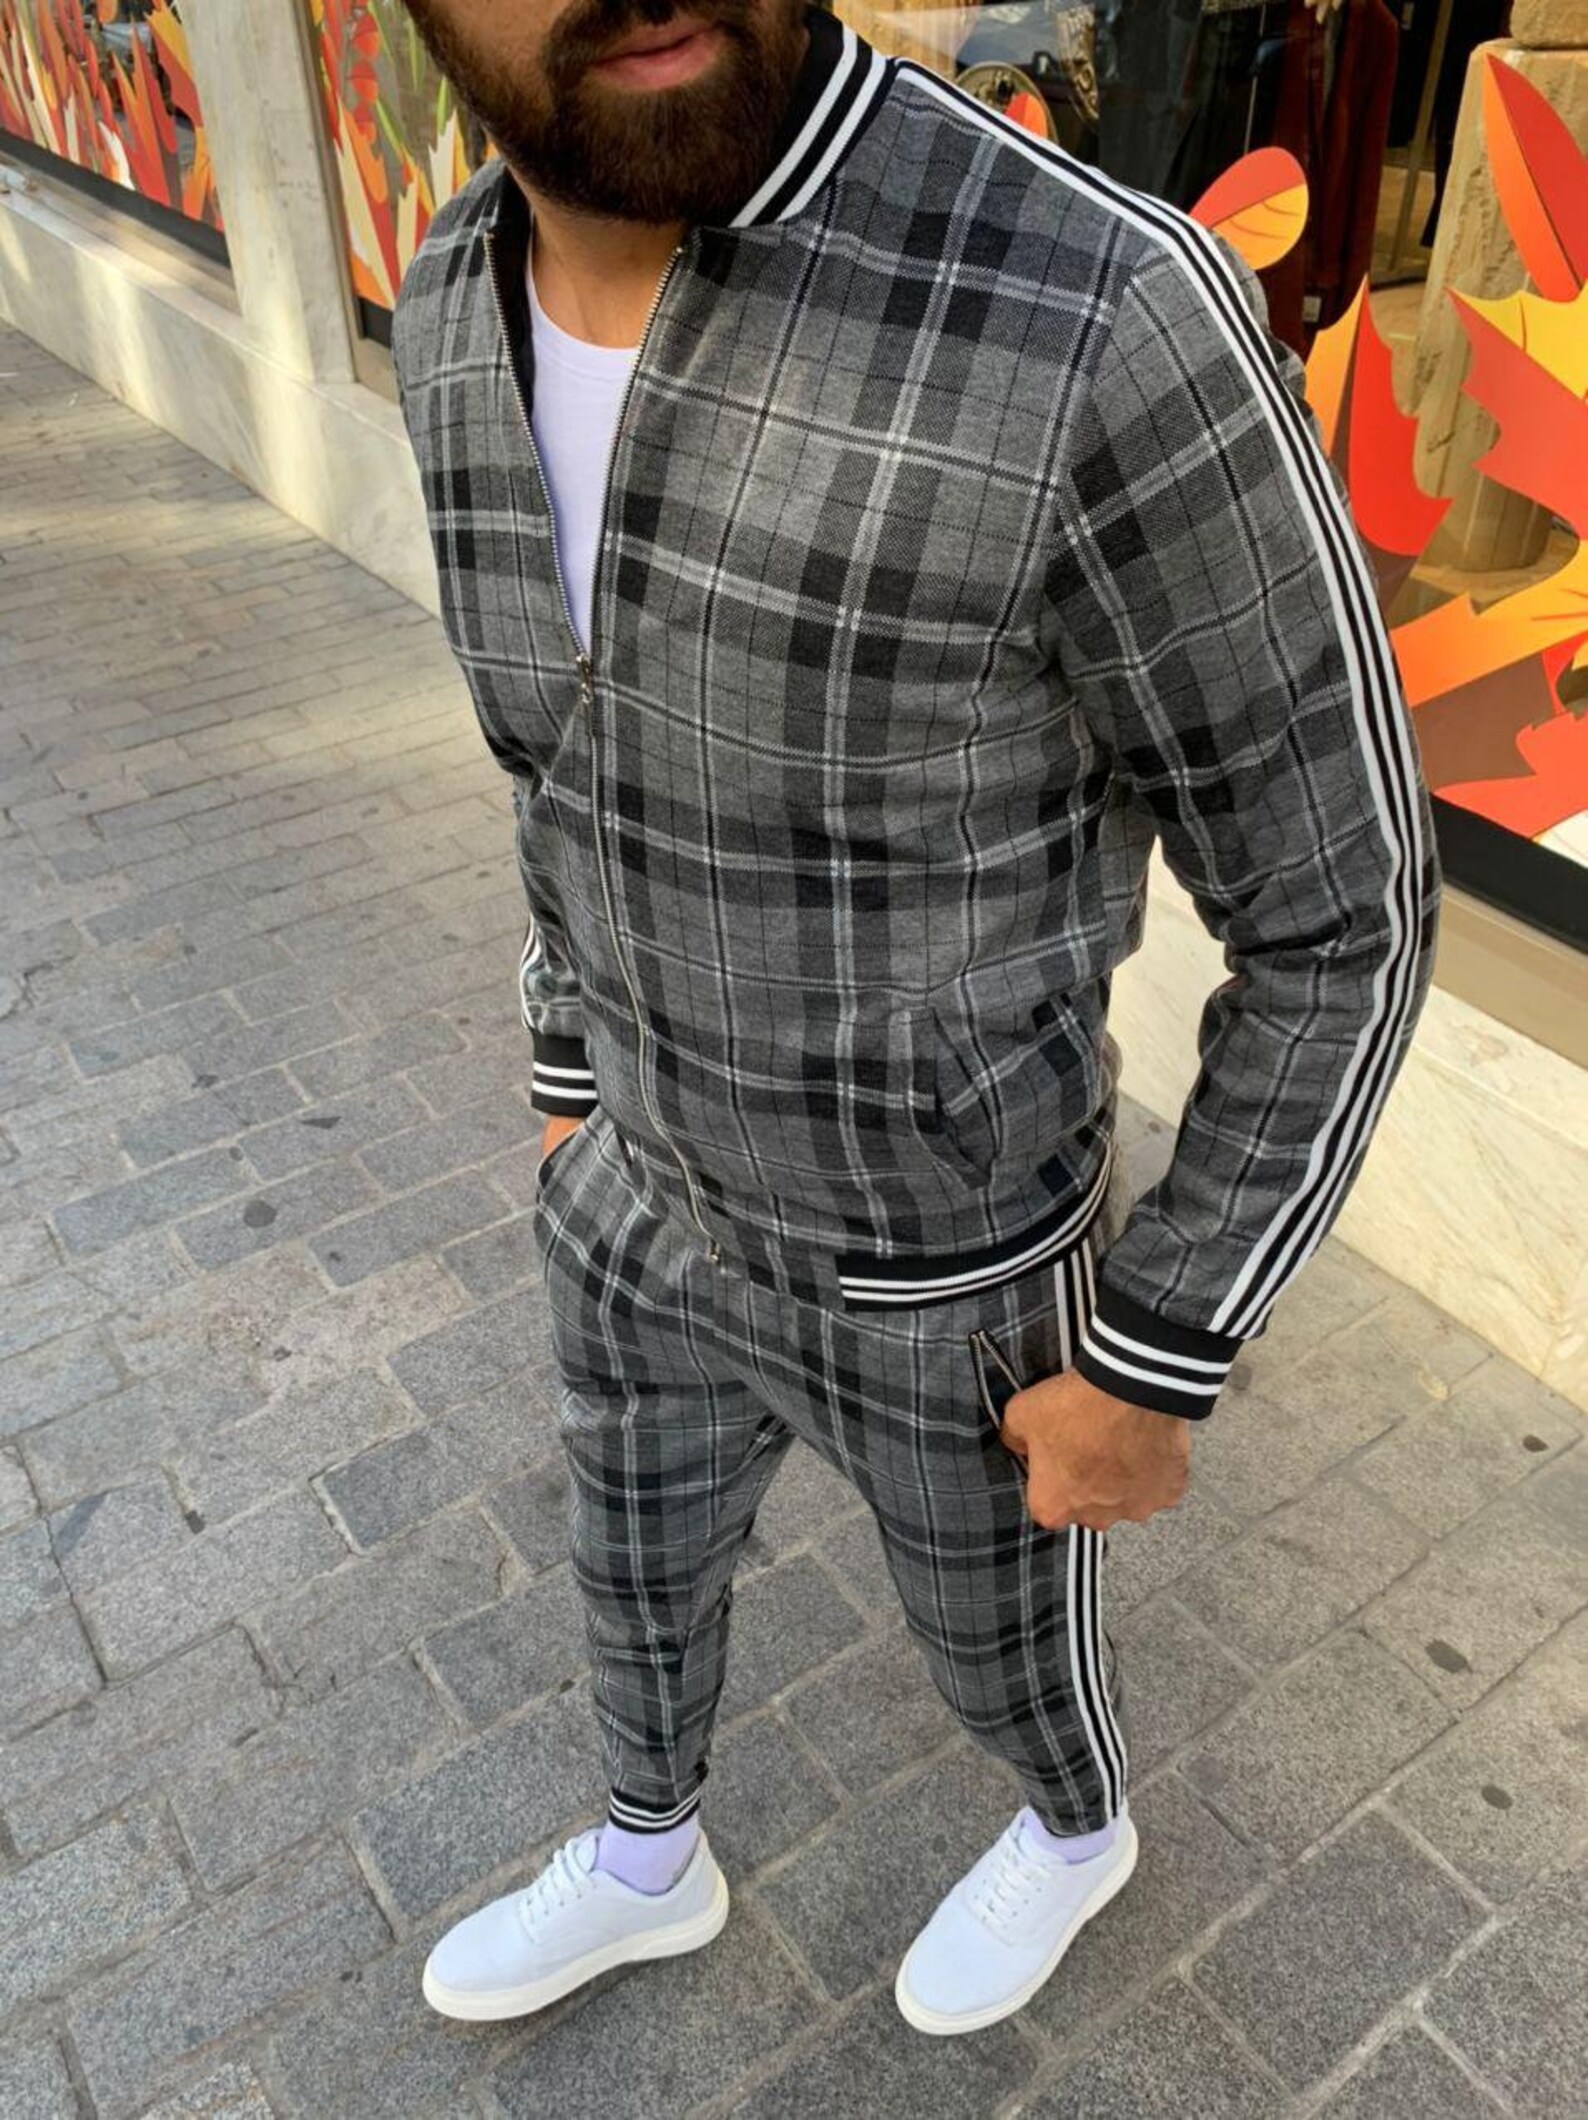 Gentlemen Gray Tracksuit Dark Gray Stripped Checked Plaid The | Etsy